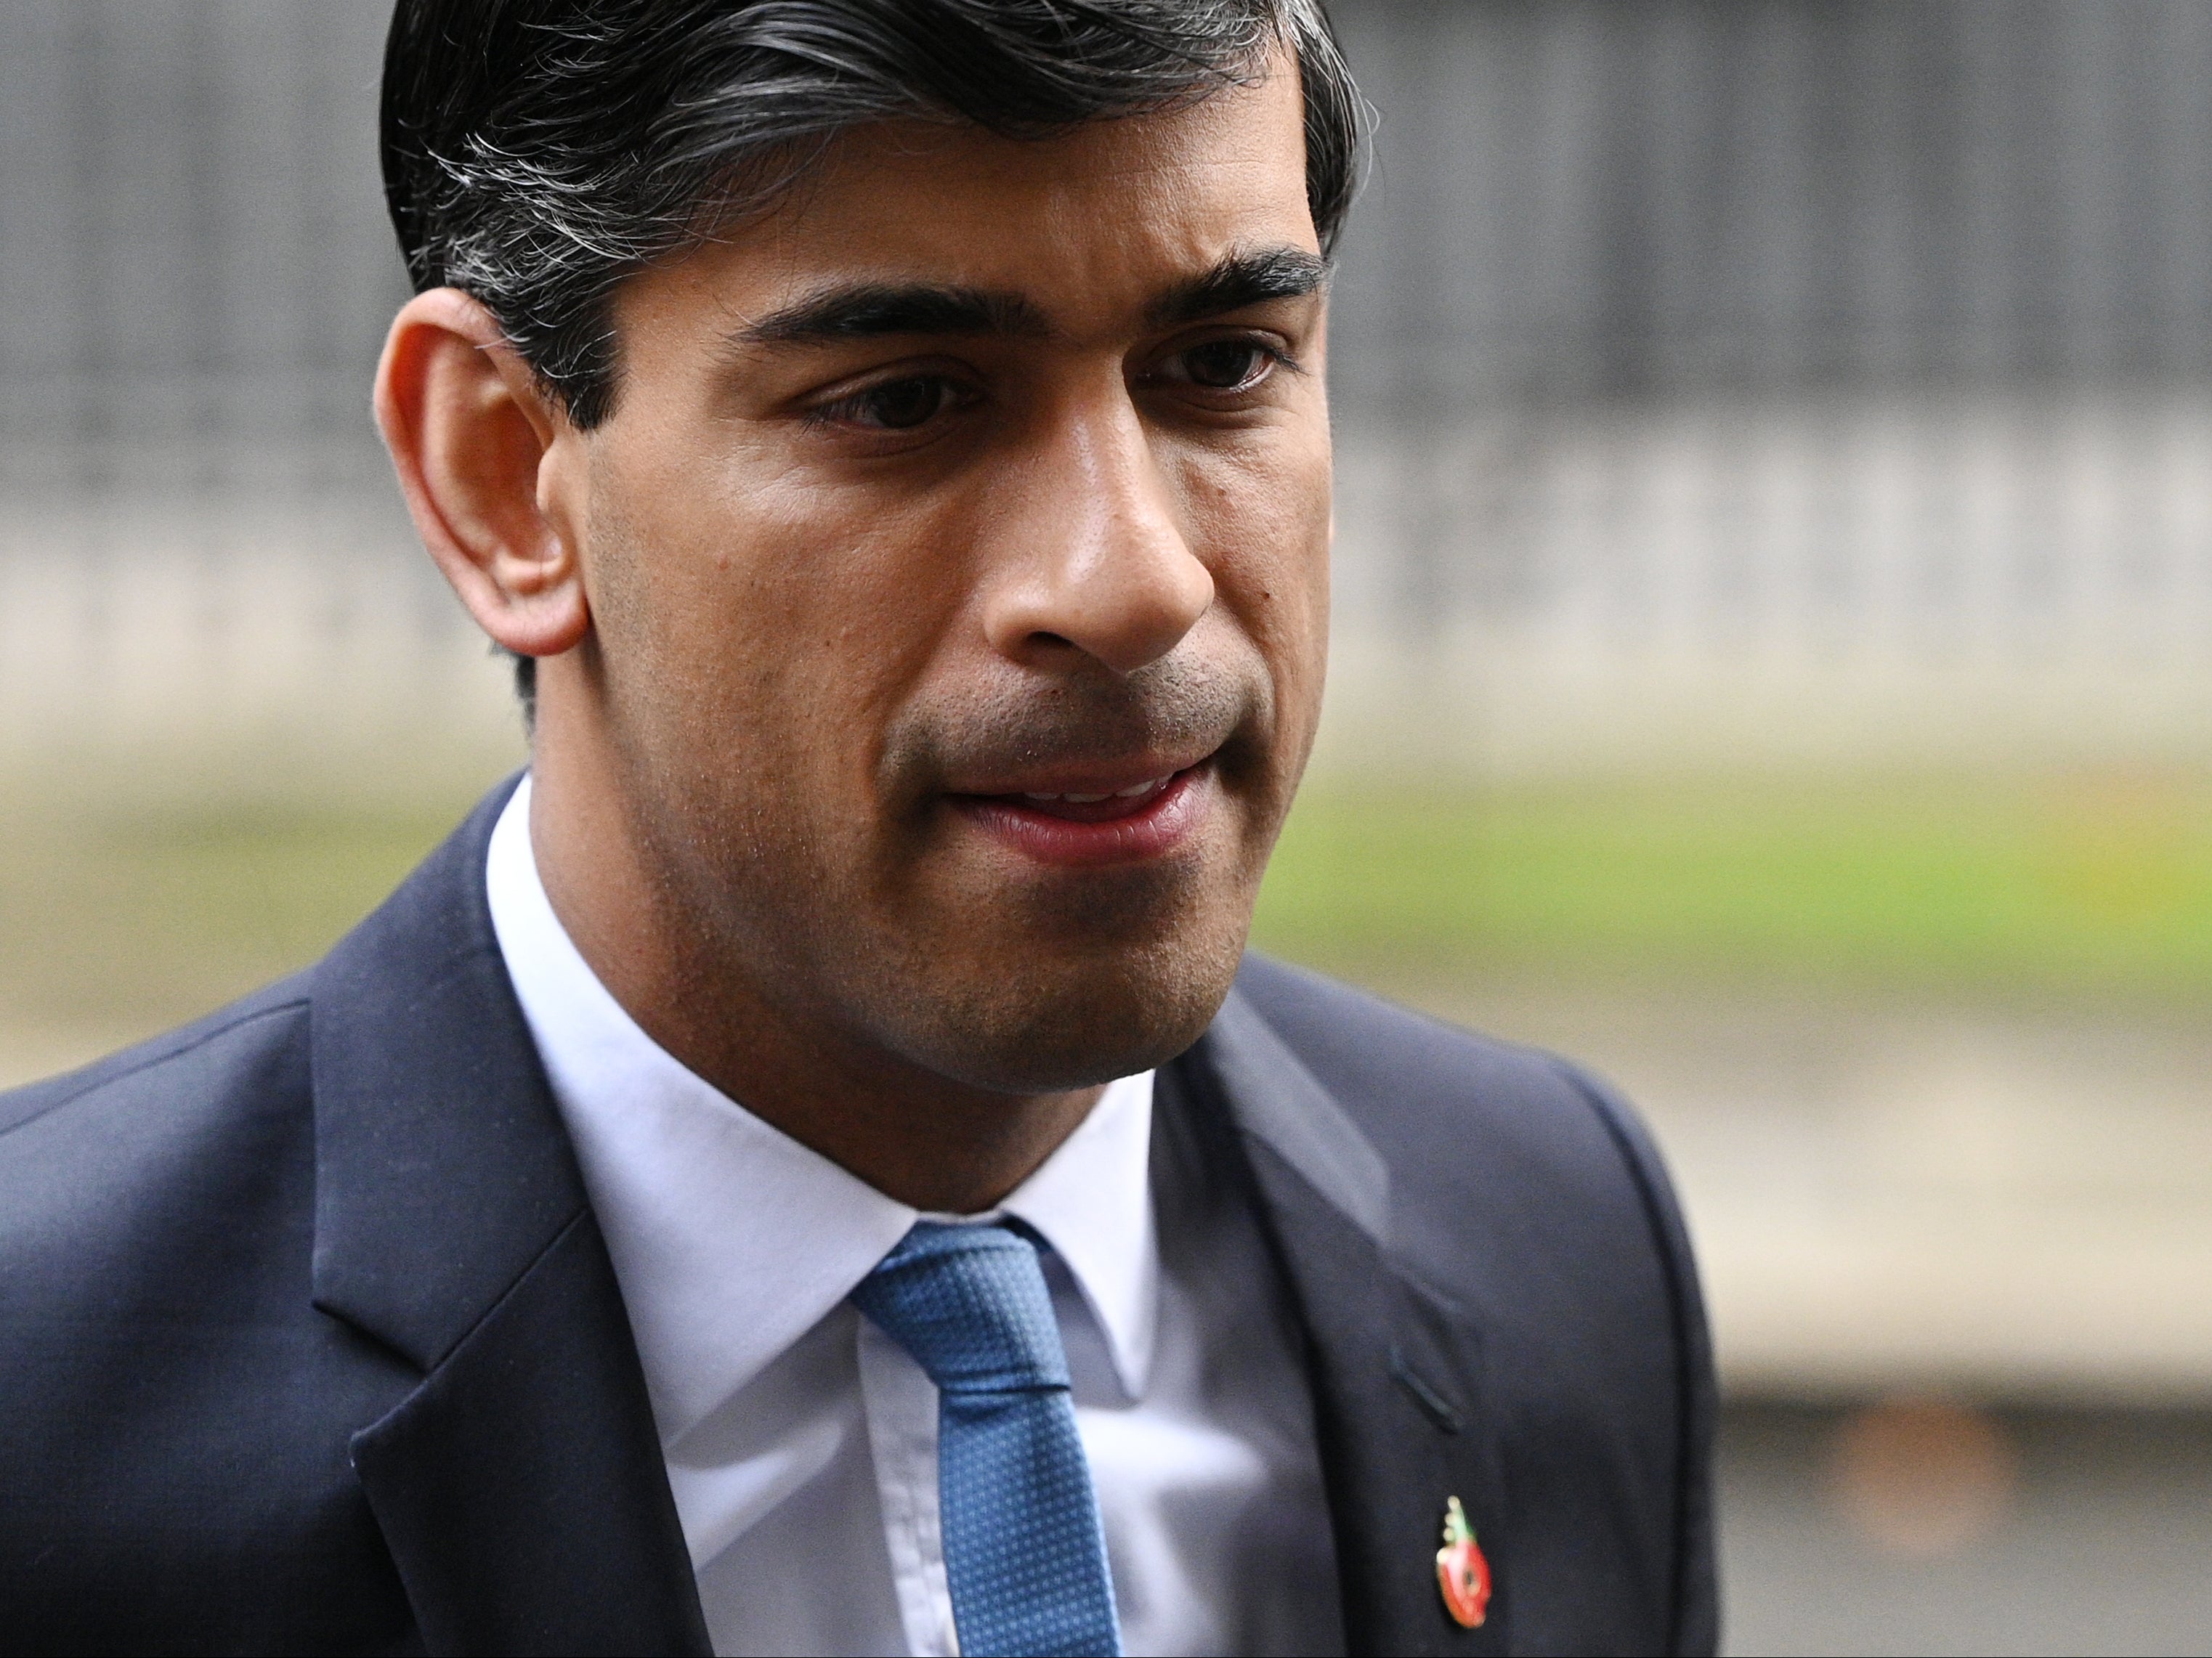 Chancellor Rishi Sunak is expected to cut pay and aid